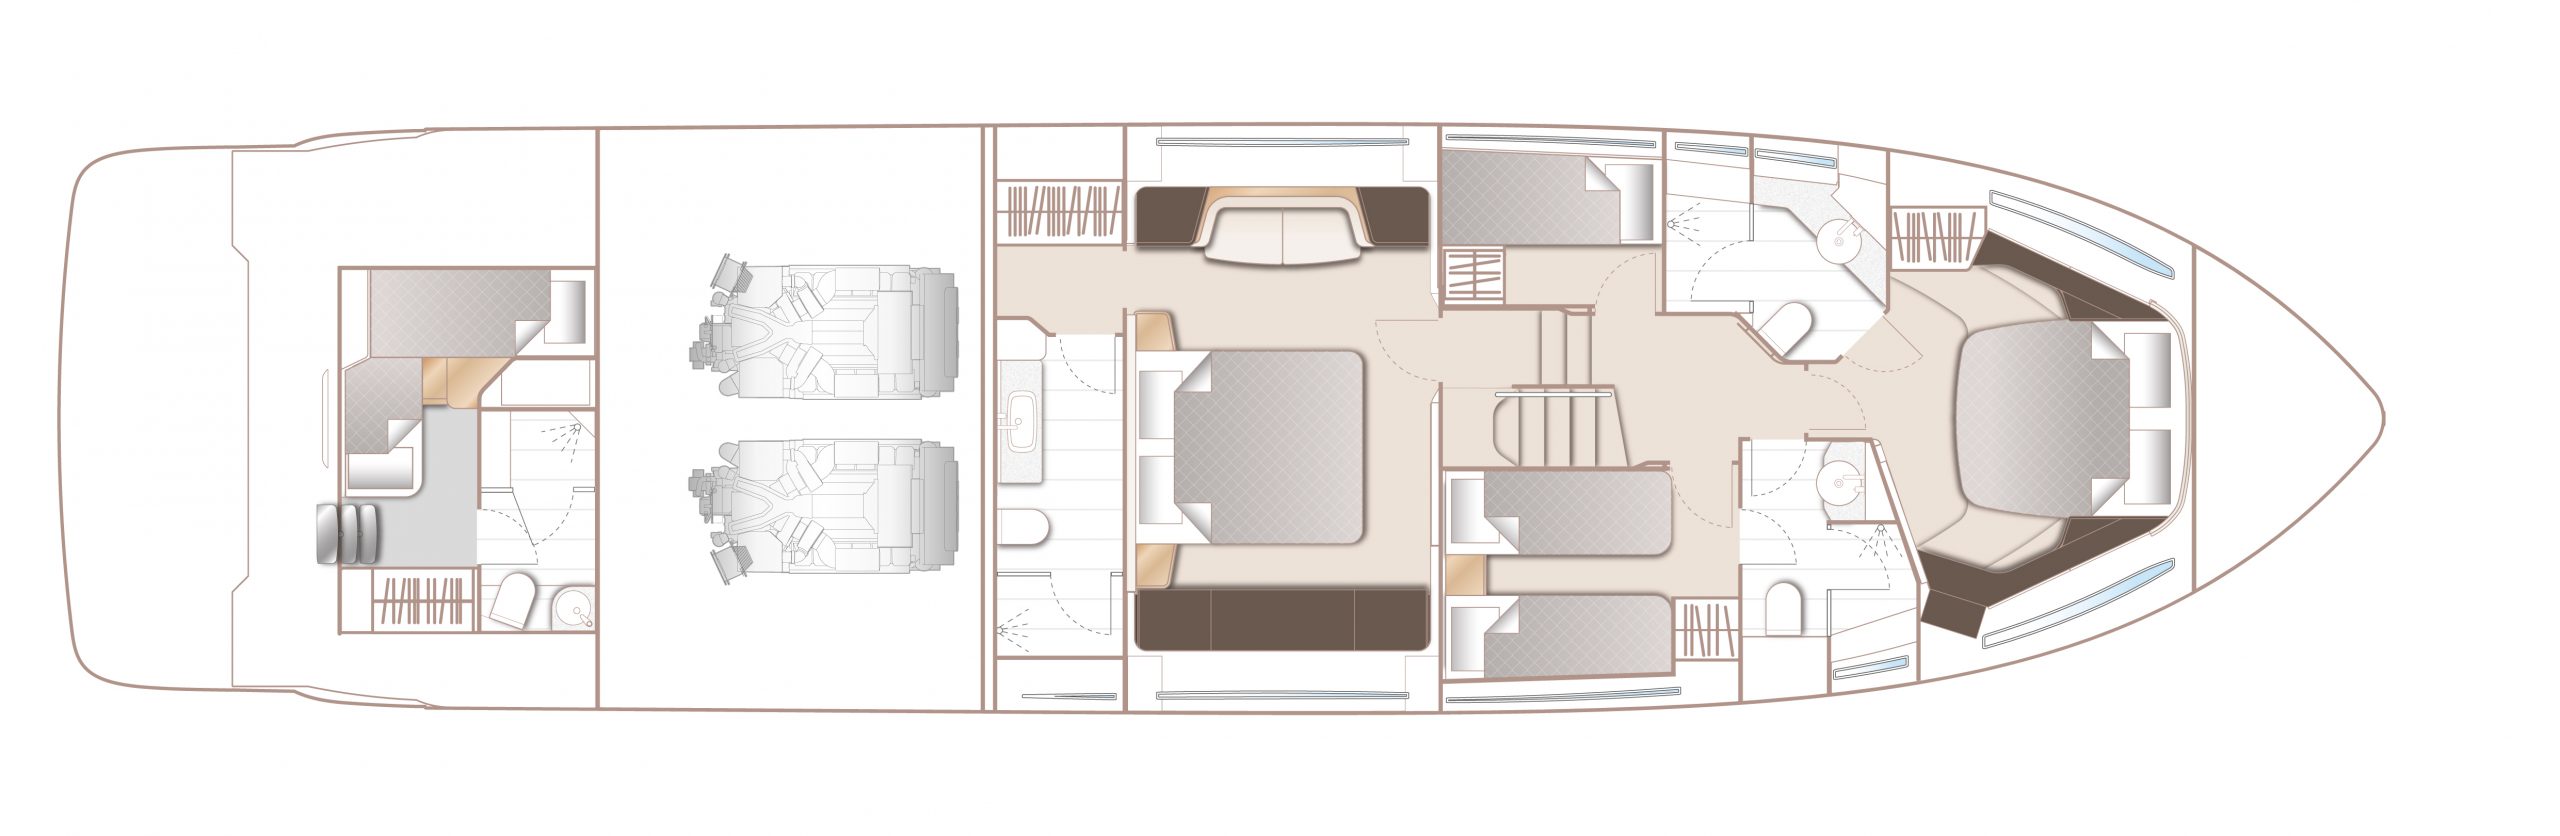 f65 layout lower deck scaled